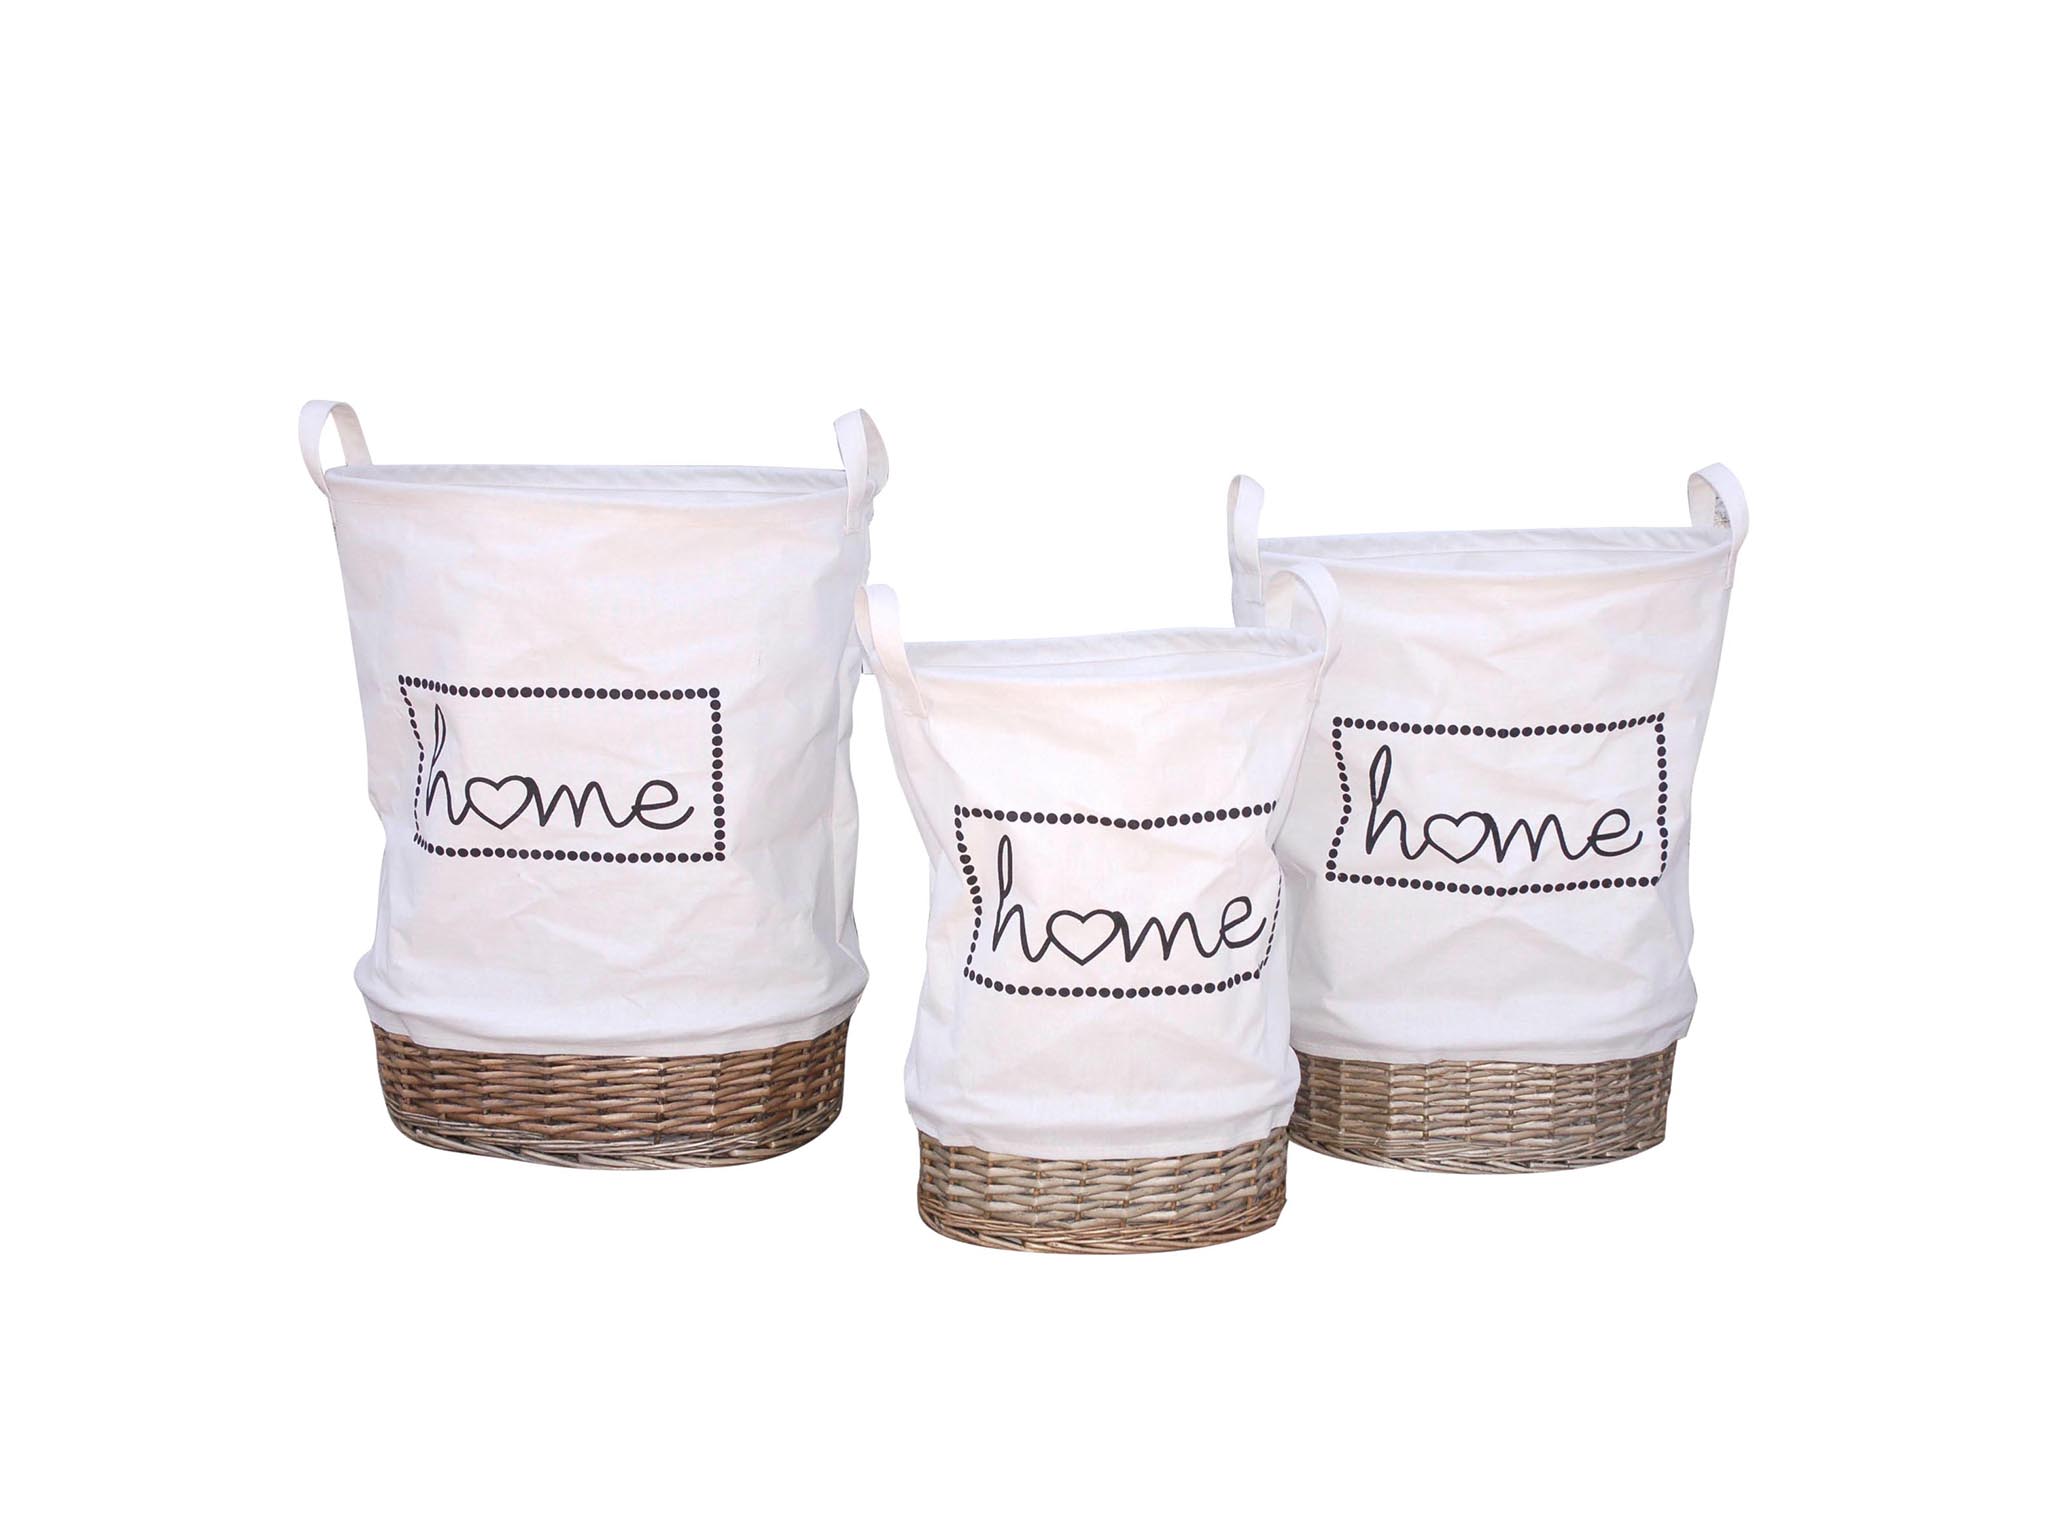 SET 3 OVAL WHITE HAMPERS HOME cod. 3900126